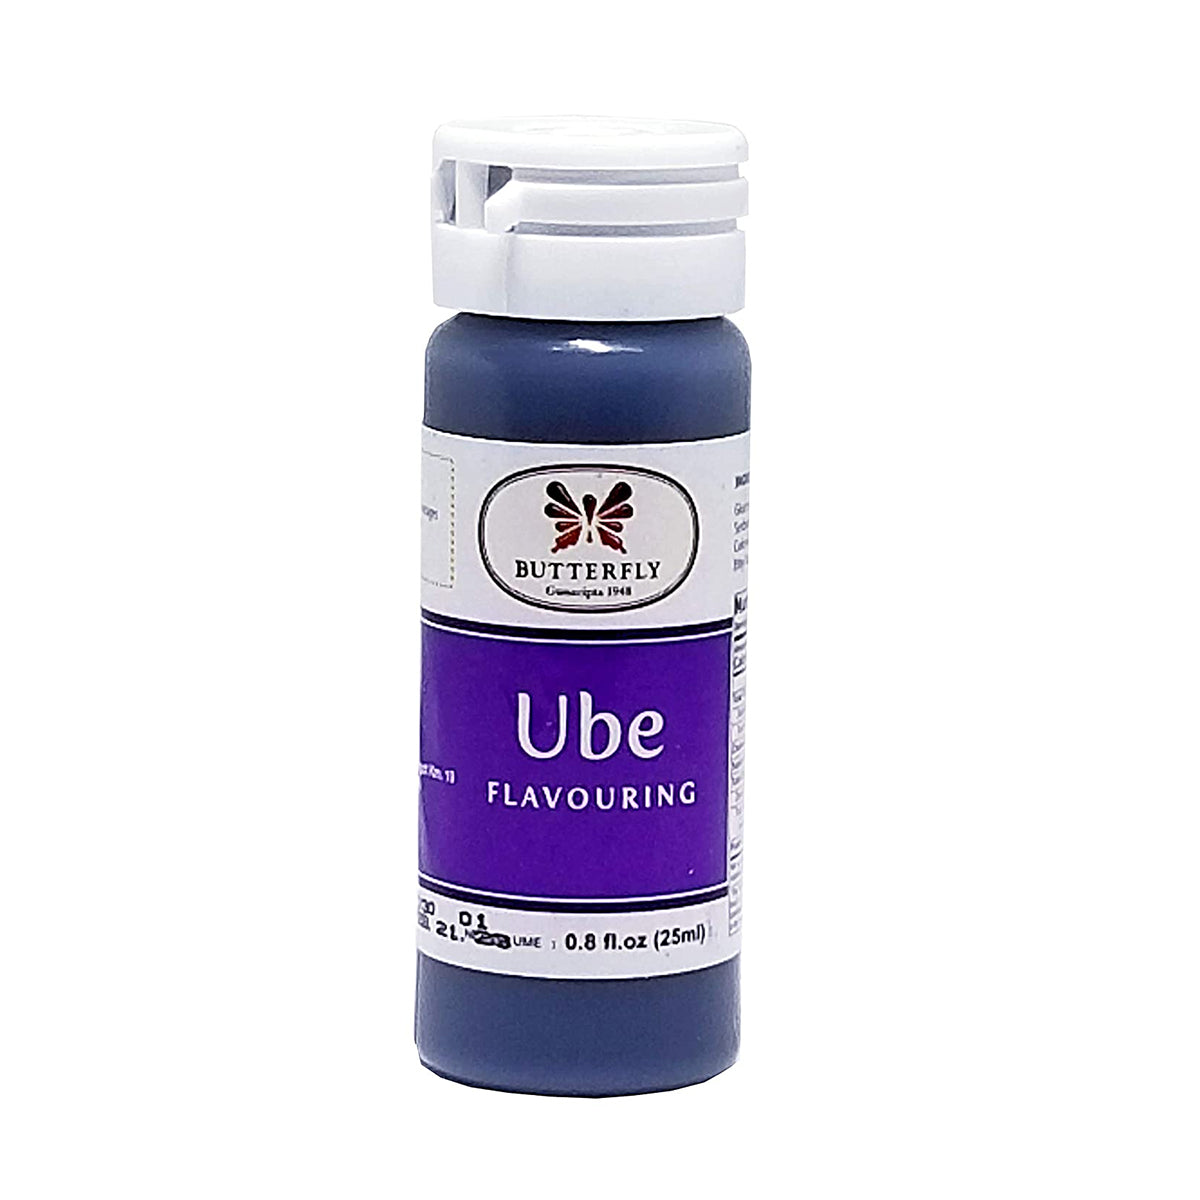 butterfly ube flavoring - 1oz